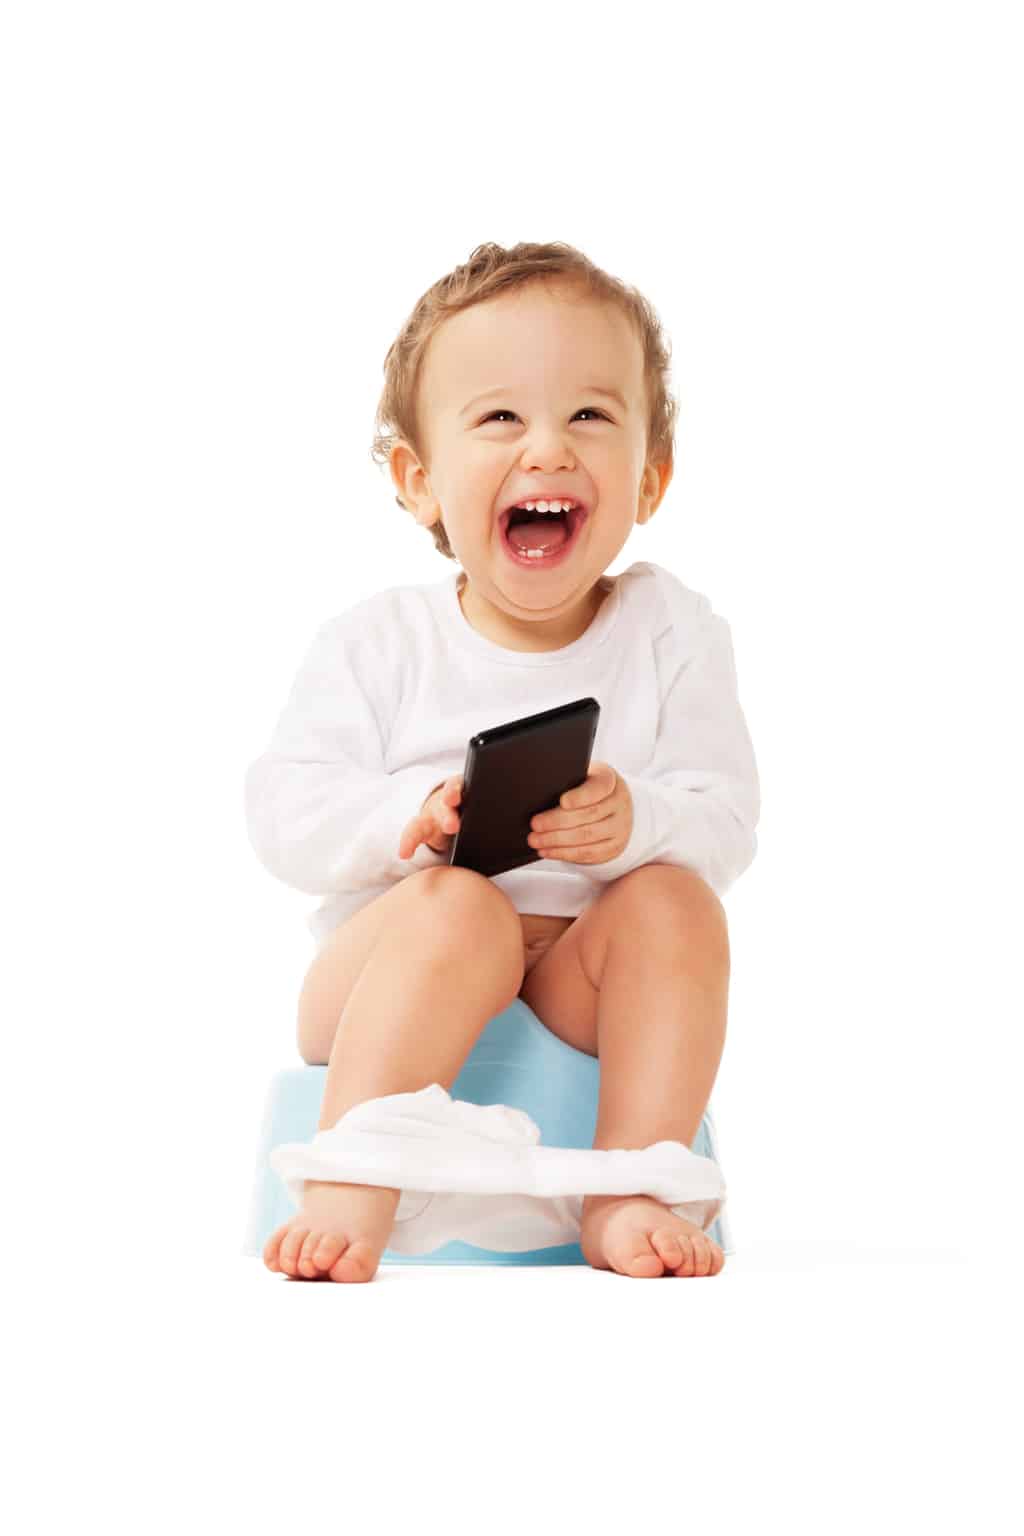 5 Fun Apps to Make Potty Training Easier